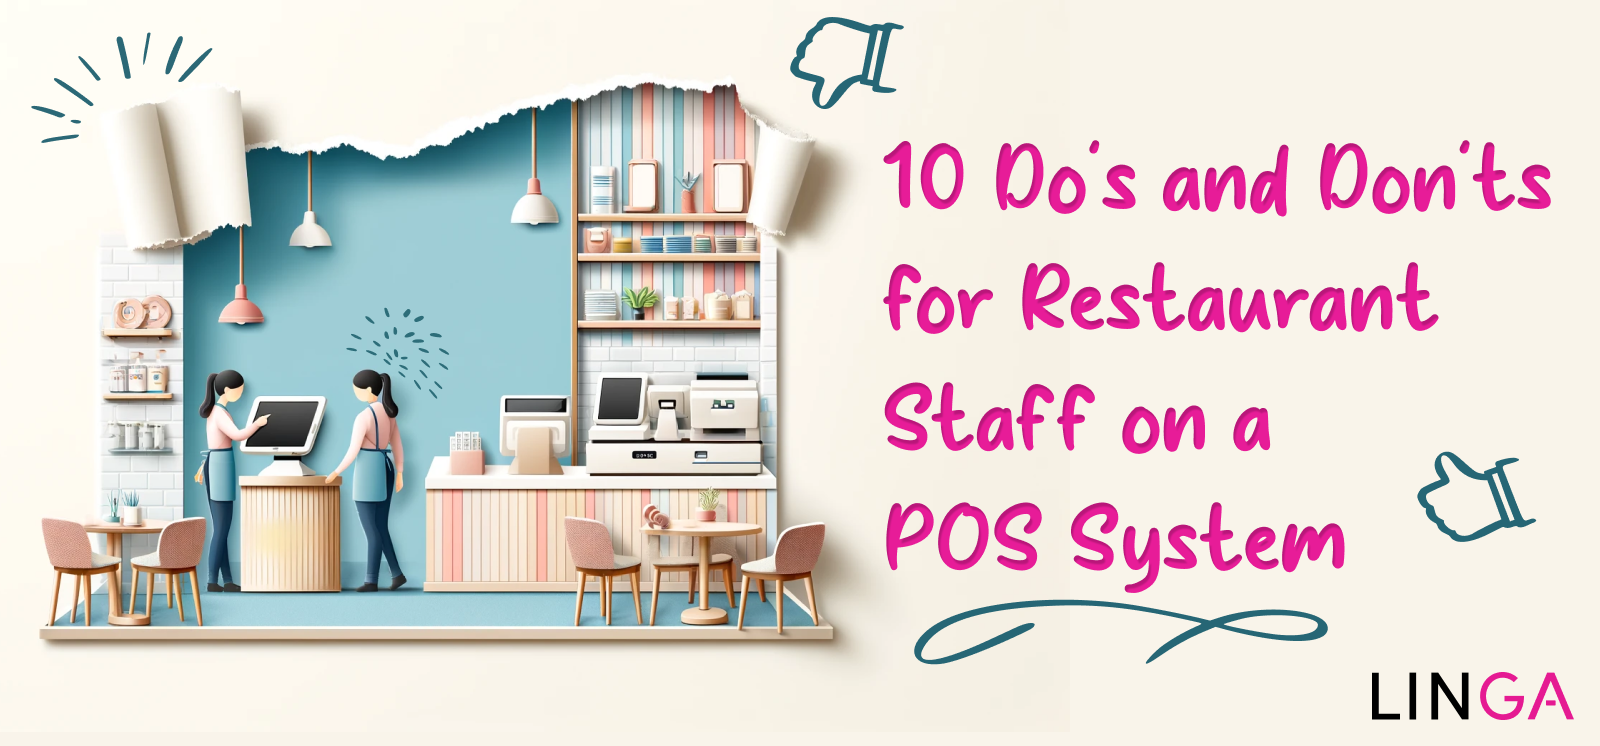 Restaurant Staff Do's and Don'ts on a POS System